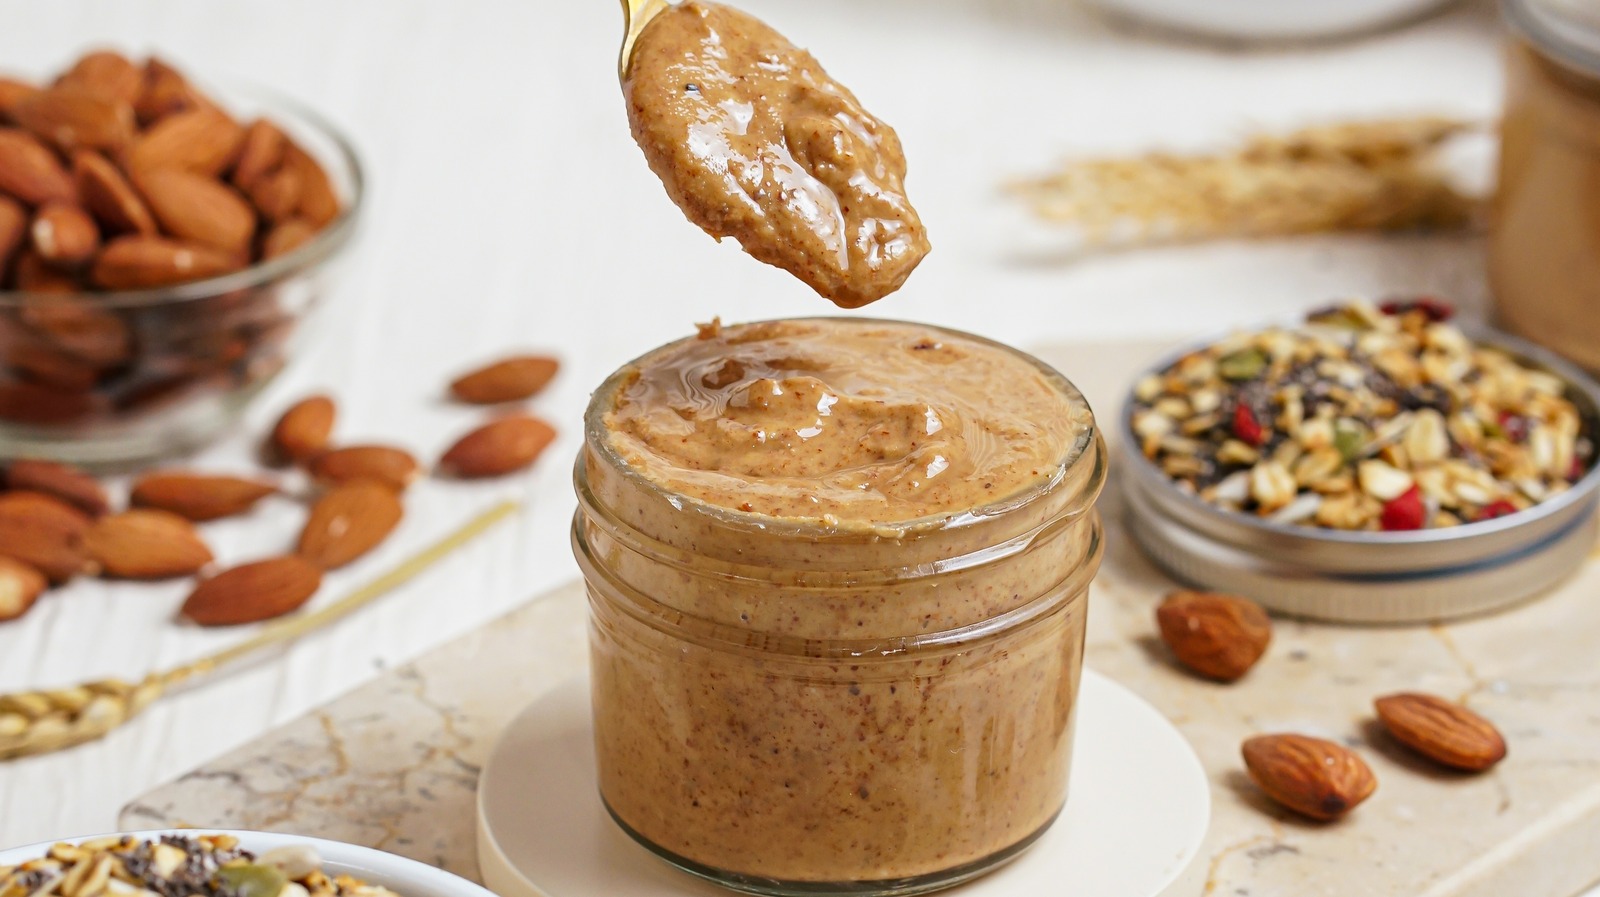 https://www.tastingtable.com/img/gallery/the-mess-free-way-to-stir-nut-butter/l-intro-1657548491.jpg